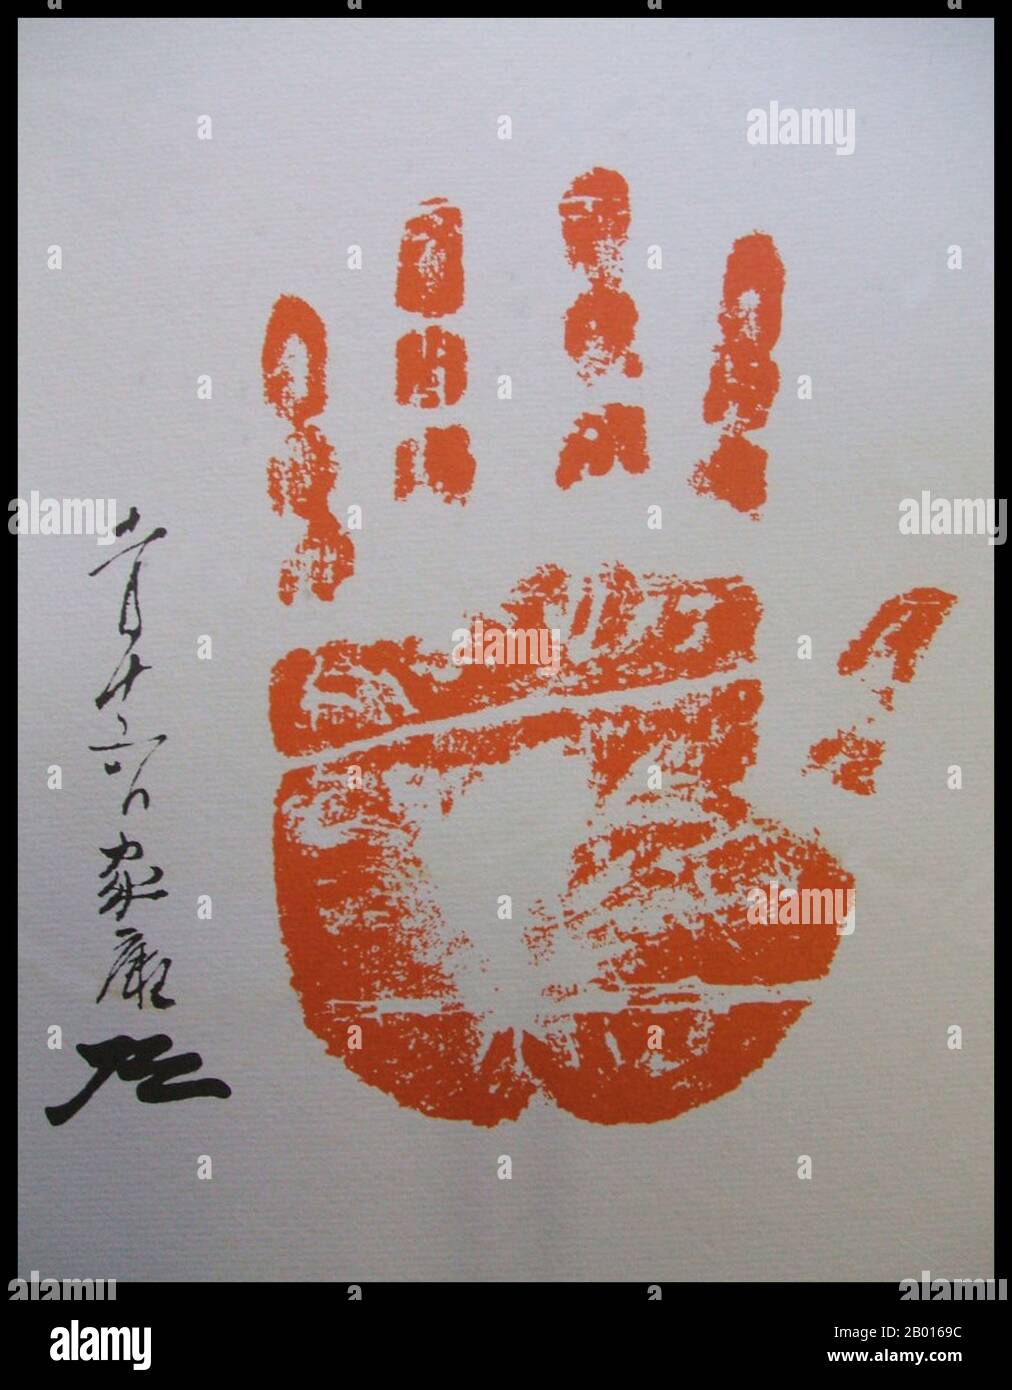 Japan: Handprint of Tokugawa Ieyasu (1543-1616), founder and first ruler of the Tokugawa Shogunate (1600-1868).  Tokugawa Ieyasu (January 31, 1543 – June 1, 1616) was the founder and first shogun of the Tokugawa shogunate of Japan, which ruled from the Battle of Sekigahara in 1600 until the Meiji Restoration in 1868. Ieyasu seized power in 1600, received appointment as shogun in 1603, abdicated from office in 1605, but remained in power until his death in 1616. Ieyasu was posthumously enshrined at Nikkō Tōshō-gū with the name Tōshō Daigongen. Stock Photo